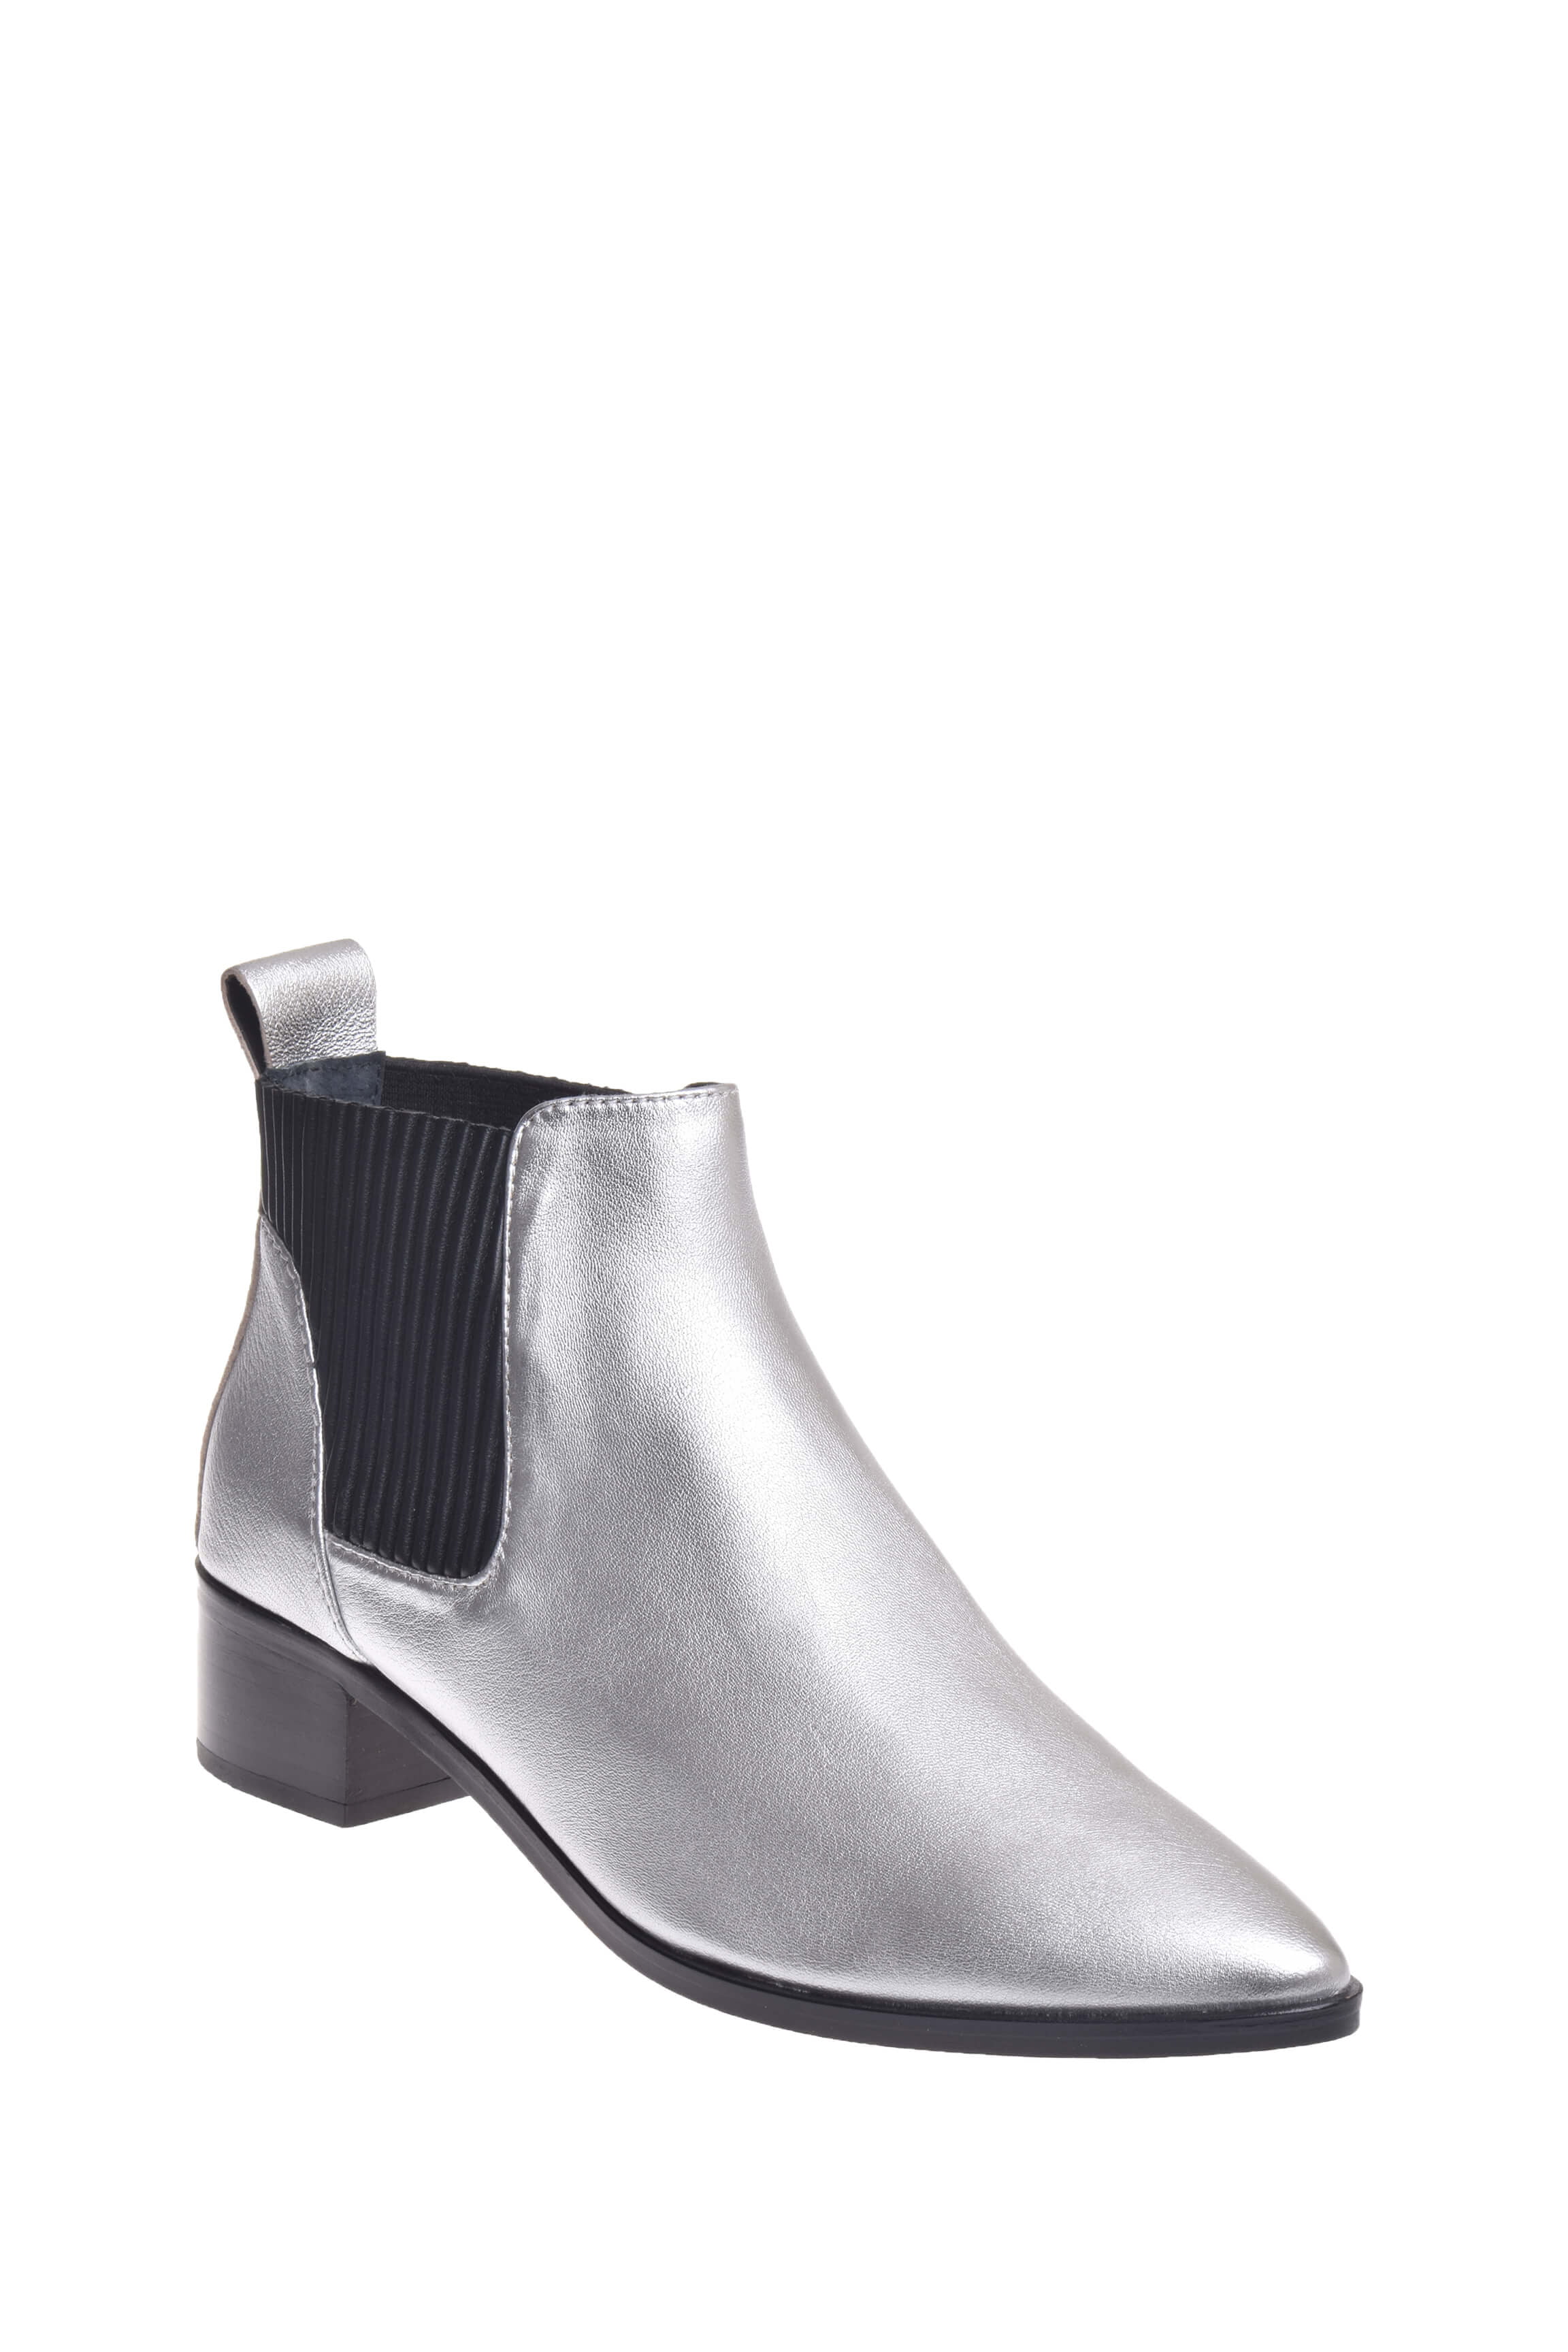 Dolce Vita Womens Macie Ankle Boot 